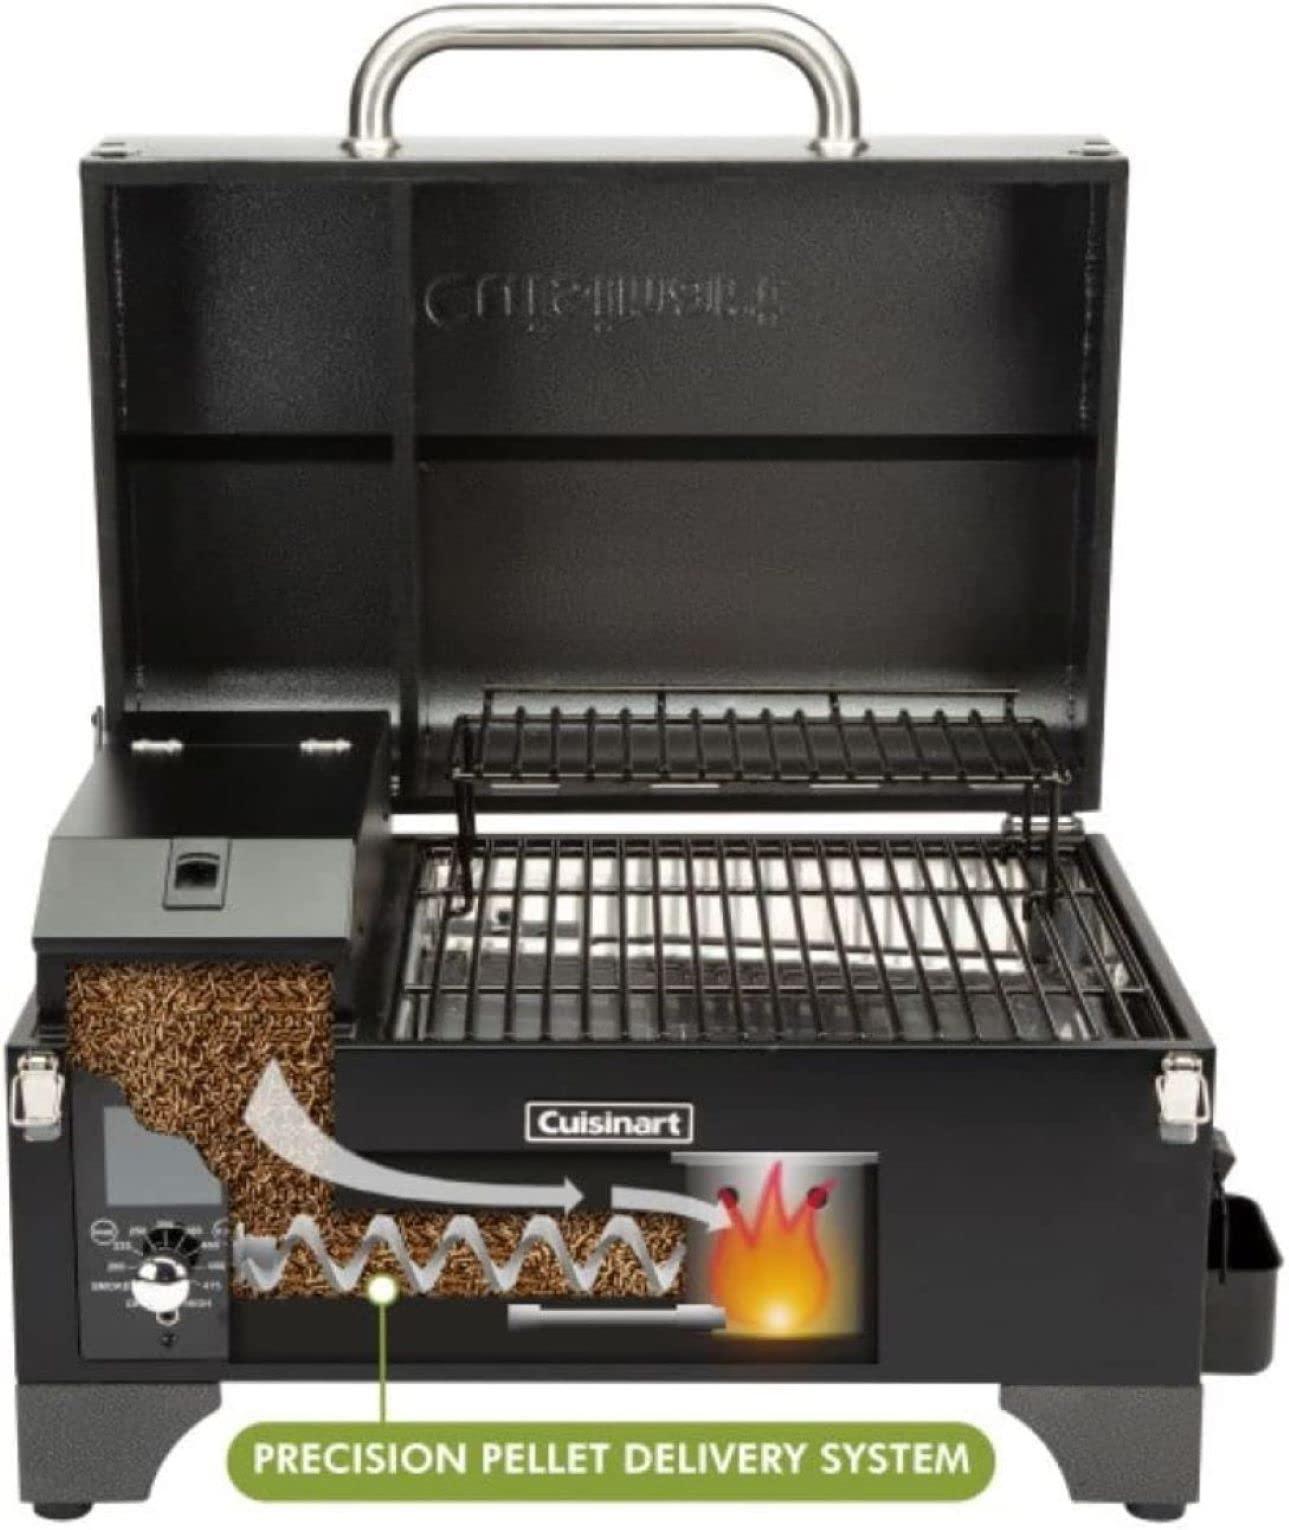 Cuisinart CPG-256 Portable Wood Pellet Grill and Smoker, Black and Dark Gray - CookCave